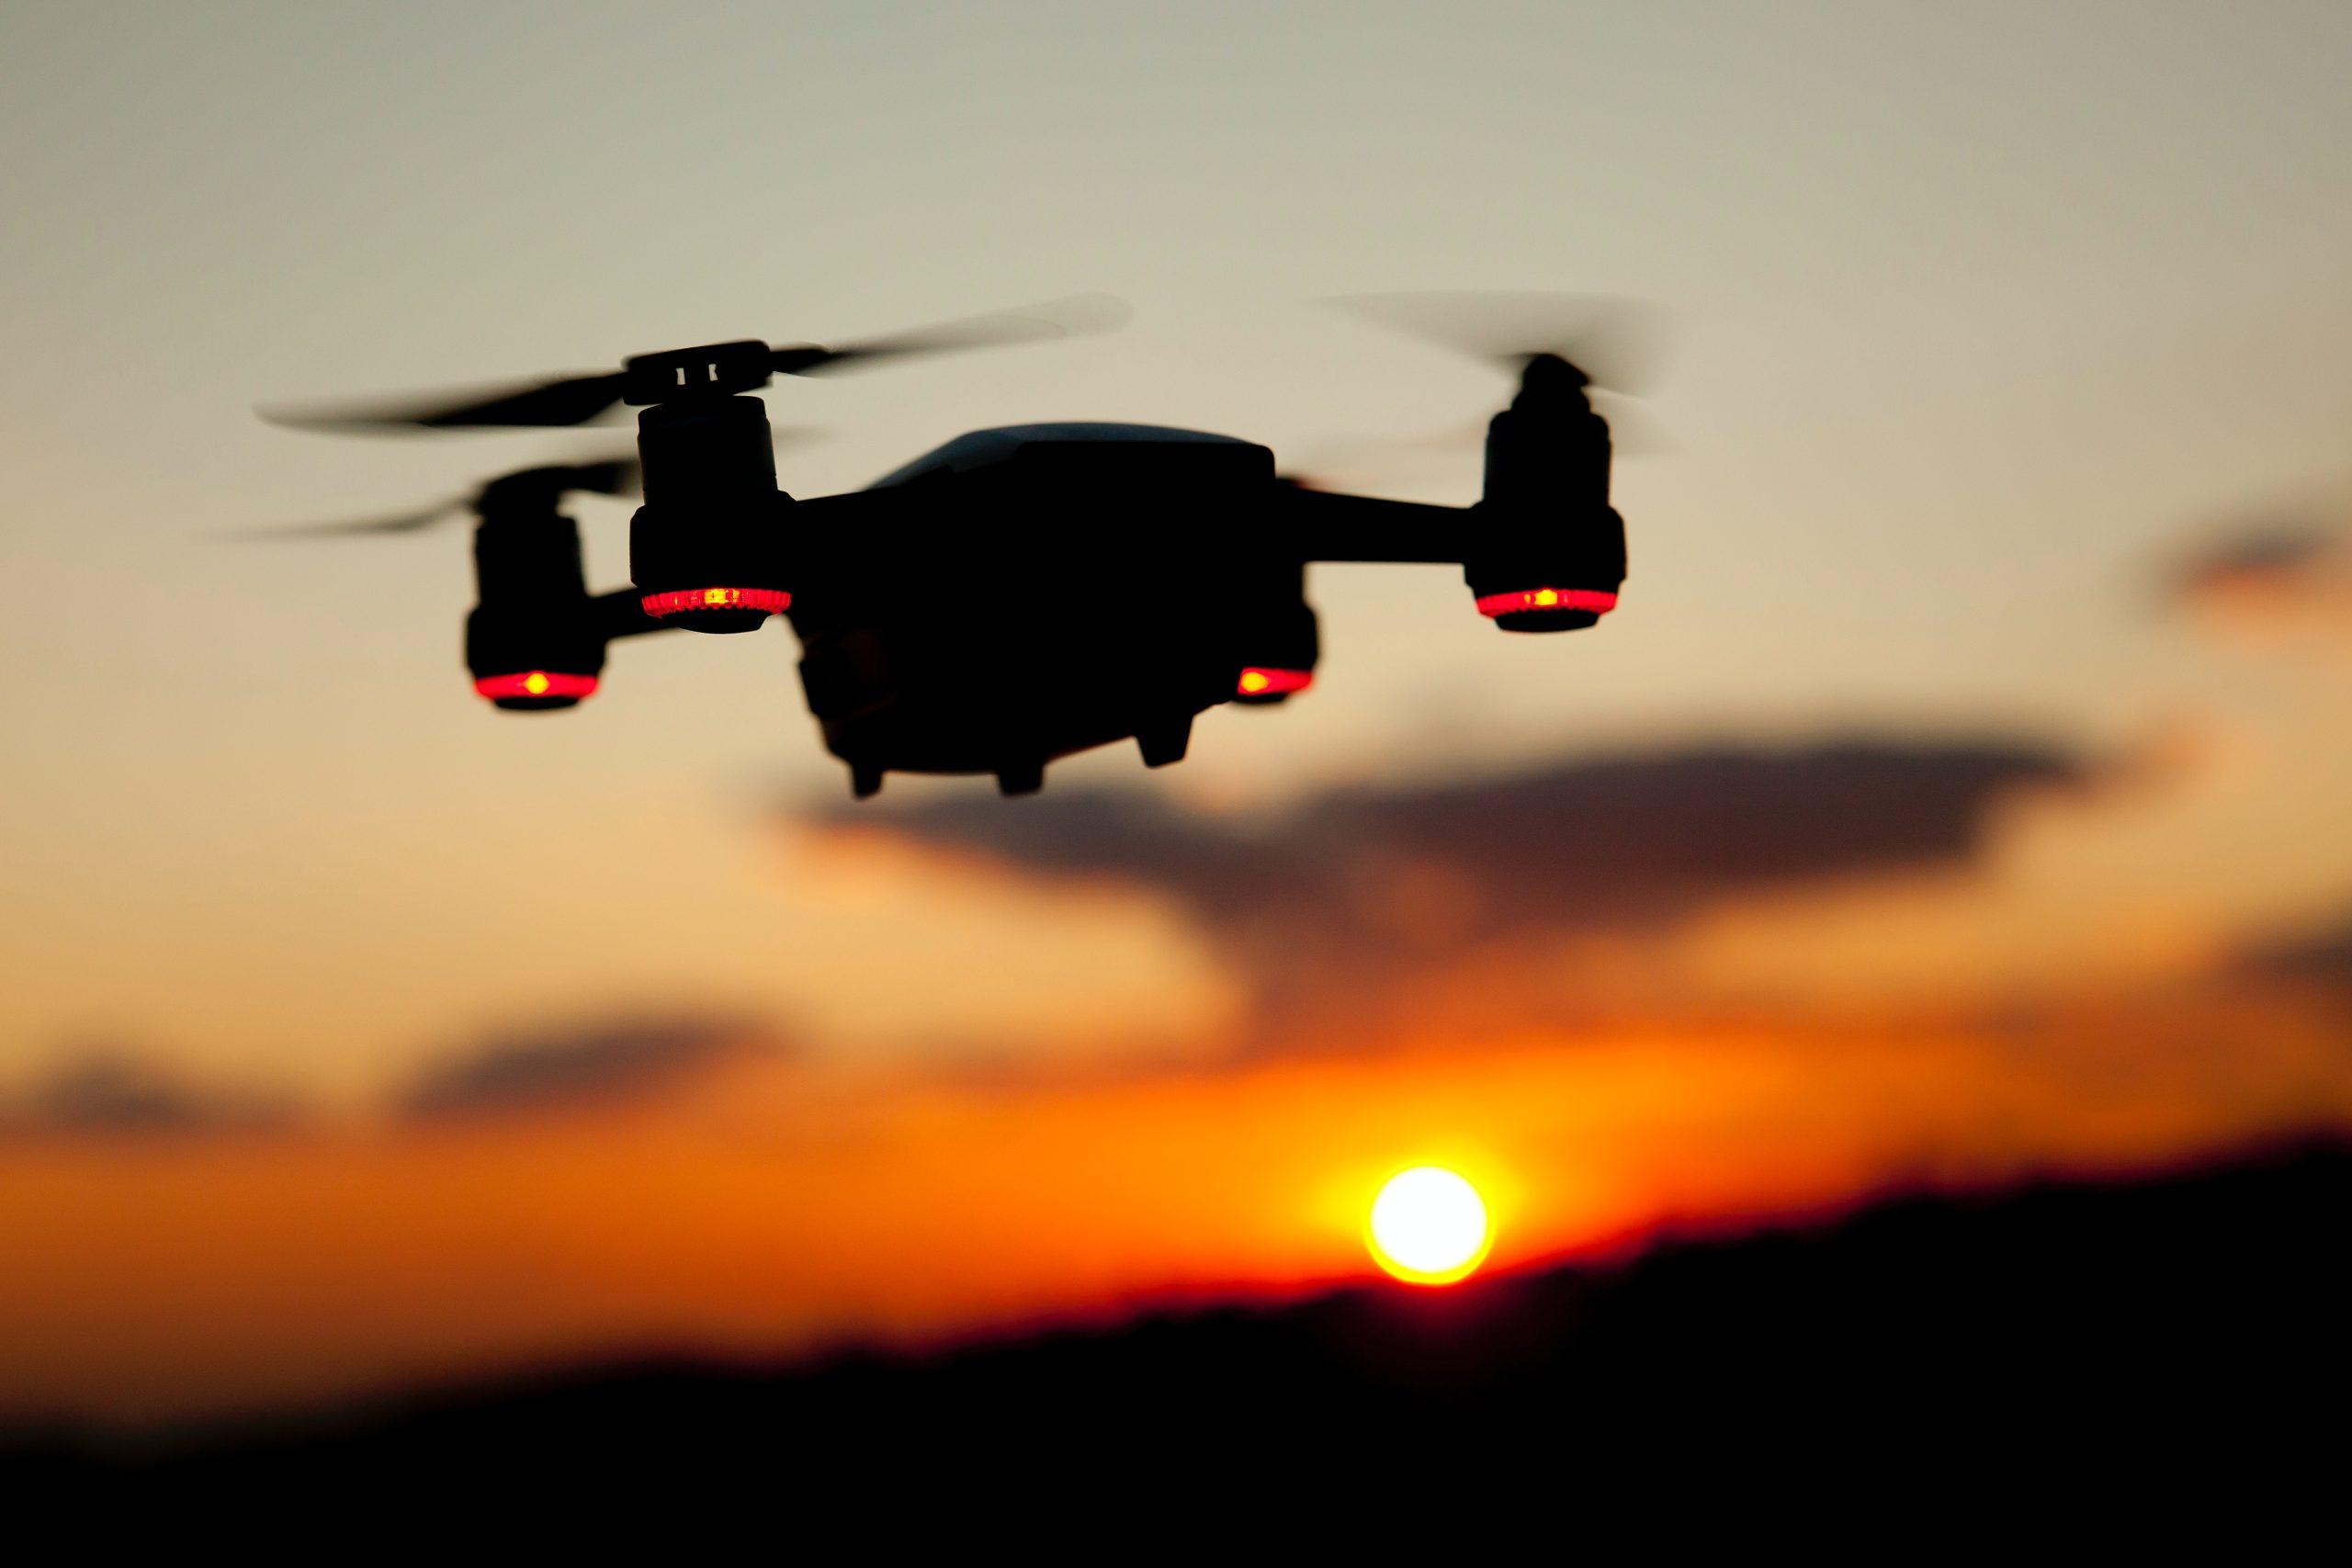 Regulations to Know Before Starting a Construction Drone Program